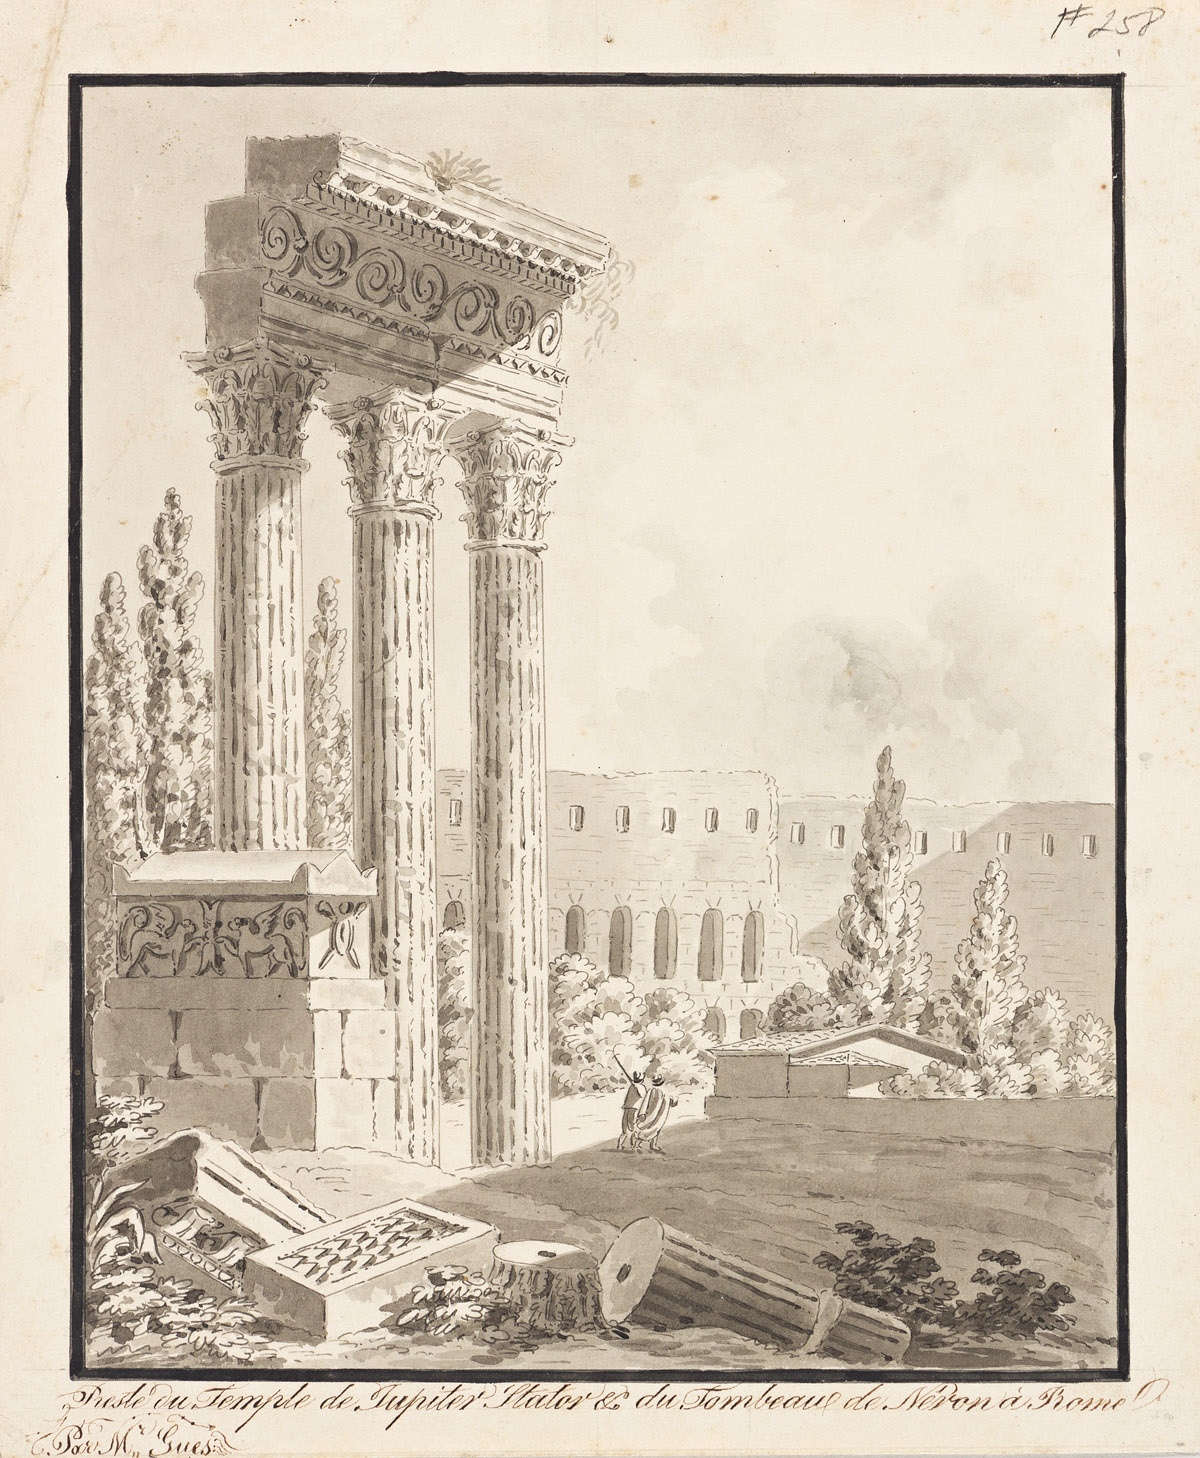 FRENCH SCHOOL, EARLY 19TH CENTURY The Temple of Jupiter and the Tomb of Nero, with the Colosseum in the Distance.